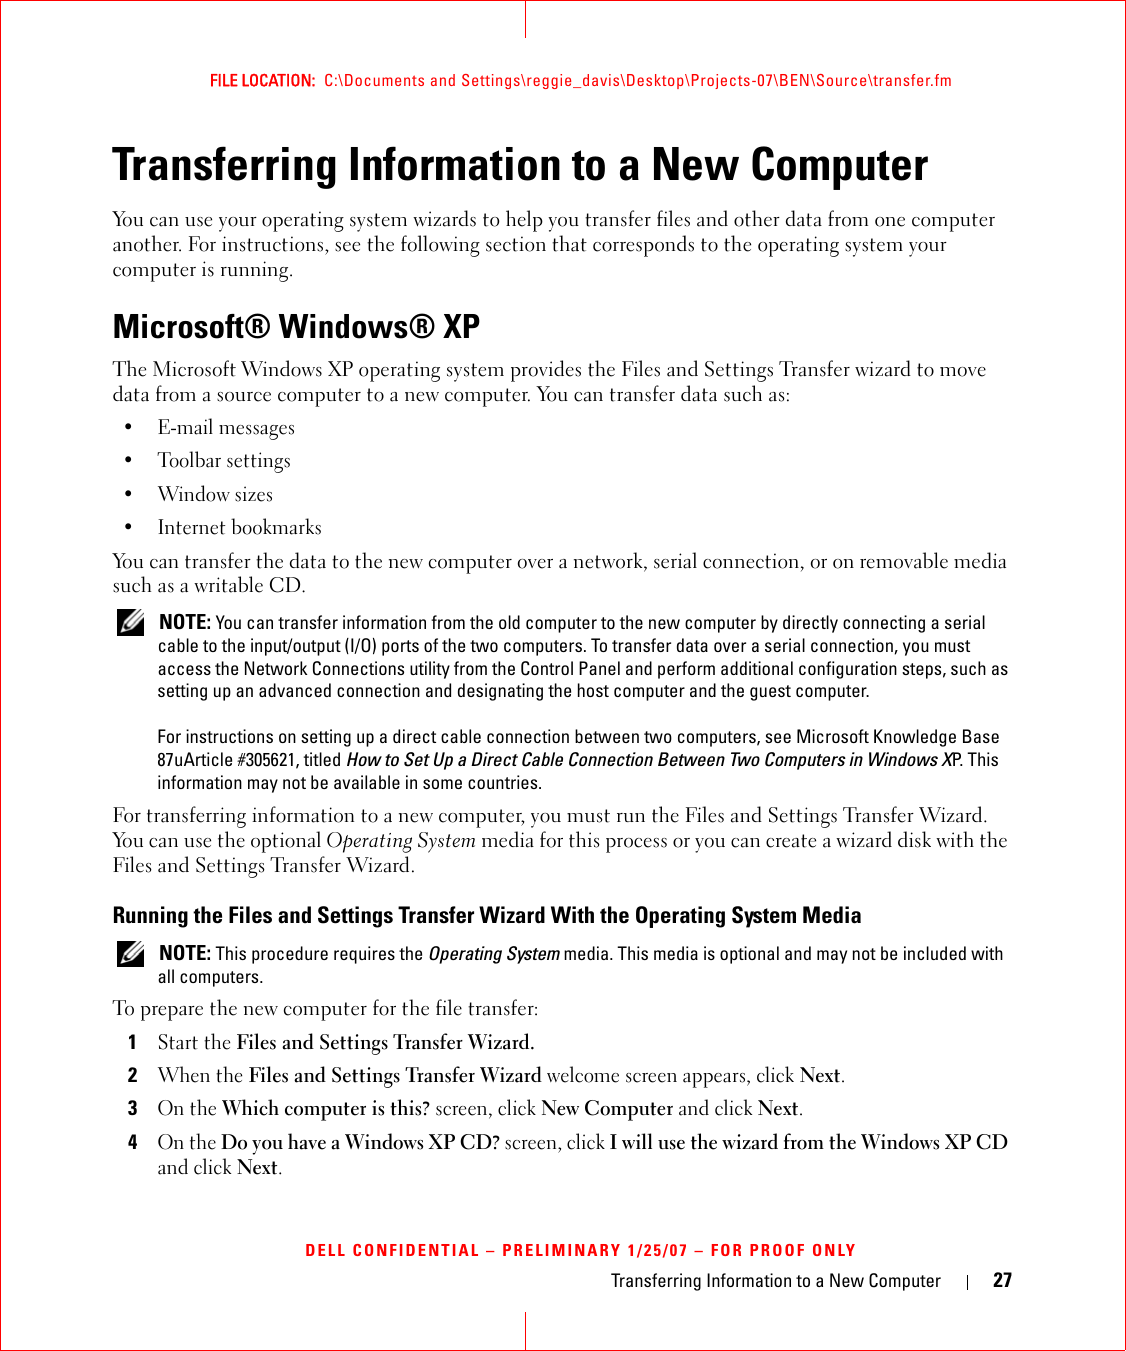 Transferring Information to a New Computer 27FILE LOCATION:  C:\Documents and Settings\reggie_davis\Desktop\Projects-07\BEN\Source\transfer.fmDELL CONFIDENTIAL – PRELIMINARY 1/25/07 – FOR PROOF ONLYTransferring Information to a New ComputerYou can use your operating system wizards to help you transfer files and other data from one computer another. For instructions, see the following section that corresponds to the operating system your computer is running.Microsoft® Windows® XPThe Microsoft Windows XP operating system provides the Files and Settings Transfer wizard to move data from a source computer to a new computer. You can transfer data such as:• E-mail messages• Toolbar settings•Window sizes• Internet bookmarks You can transfer the data to the new computer over a network, serial connection, or on removable media such as a writable CD. NOTE: You can transfer information from the old computer to the new computer by directly connecting a serial cable to the input/output (I/O) ports of the two computers. To transfer data over a serial connection, you must access the Network Connections utility from the Control Panel and perform additional configuration steps, such as setting up an advanced connection and designating the host computer and the guest computer.For instructions on setting up a direct cable connection between two computers, see Microsoft Knowledge Base 87uArticle #305621, titled How to Set Up a Direct Cable Connection Between Two Computers in Windows XP. This information may not be available in some countries.For transferring information to a new computer, you must run the Files and Settings Transfer Wizard. You can use the optional Operating System media for this process or you can create a wizard disk with the Files and Settings Transfer Wizard.Running the Files and Settings Transfer Wizard With the Operating System Media NOTE: This procedure requires the Operating System media. This media is optional and may not be included with all computers.To prepare the new computer for the file transfer:1Start the Files and Settings Transfer Wizard. 2When the Files and Settings Transfer Wizard welcome screen appears, click Next.3On the Which computer is this? screen, click New Computer and click Next.4On the Do you have a Windows XP CD? screen, click I will use the wizard from the Windows XP CD and click Next.